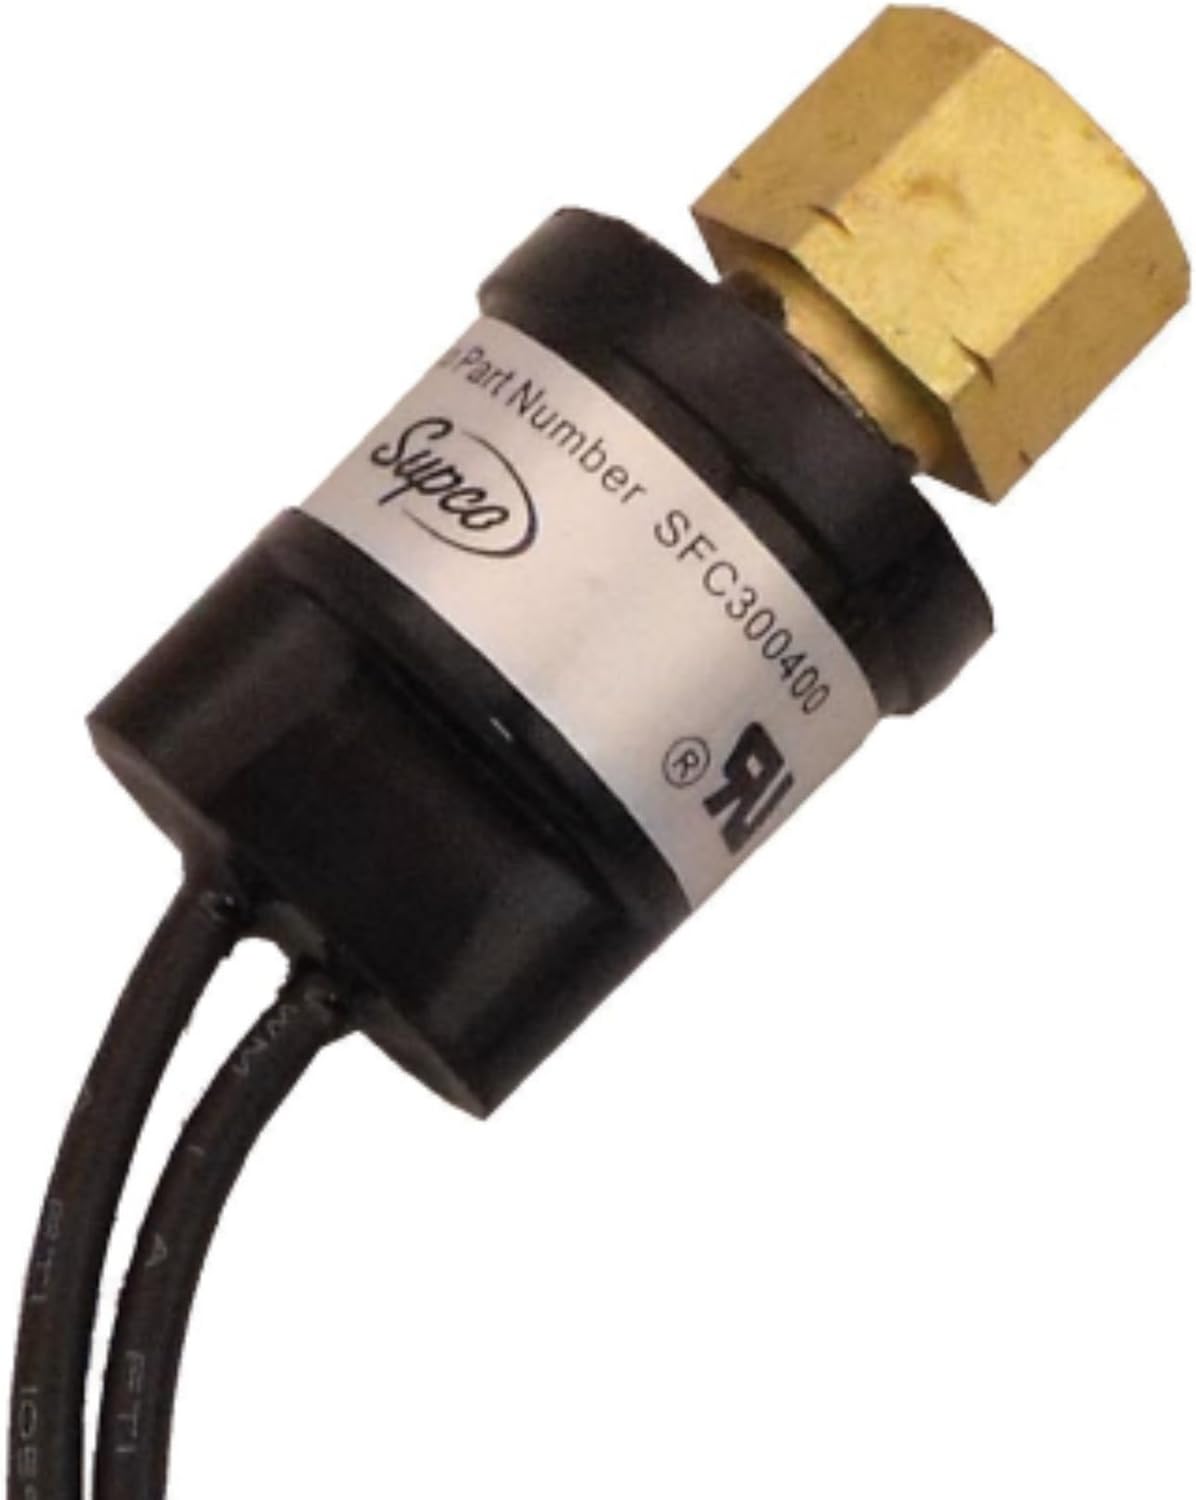 Supco Sfc300400 Fan Cycle Switch,300 Psi Op,400 Psi Cl